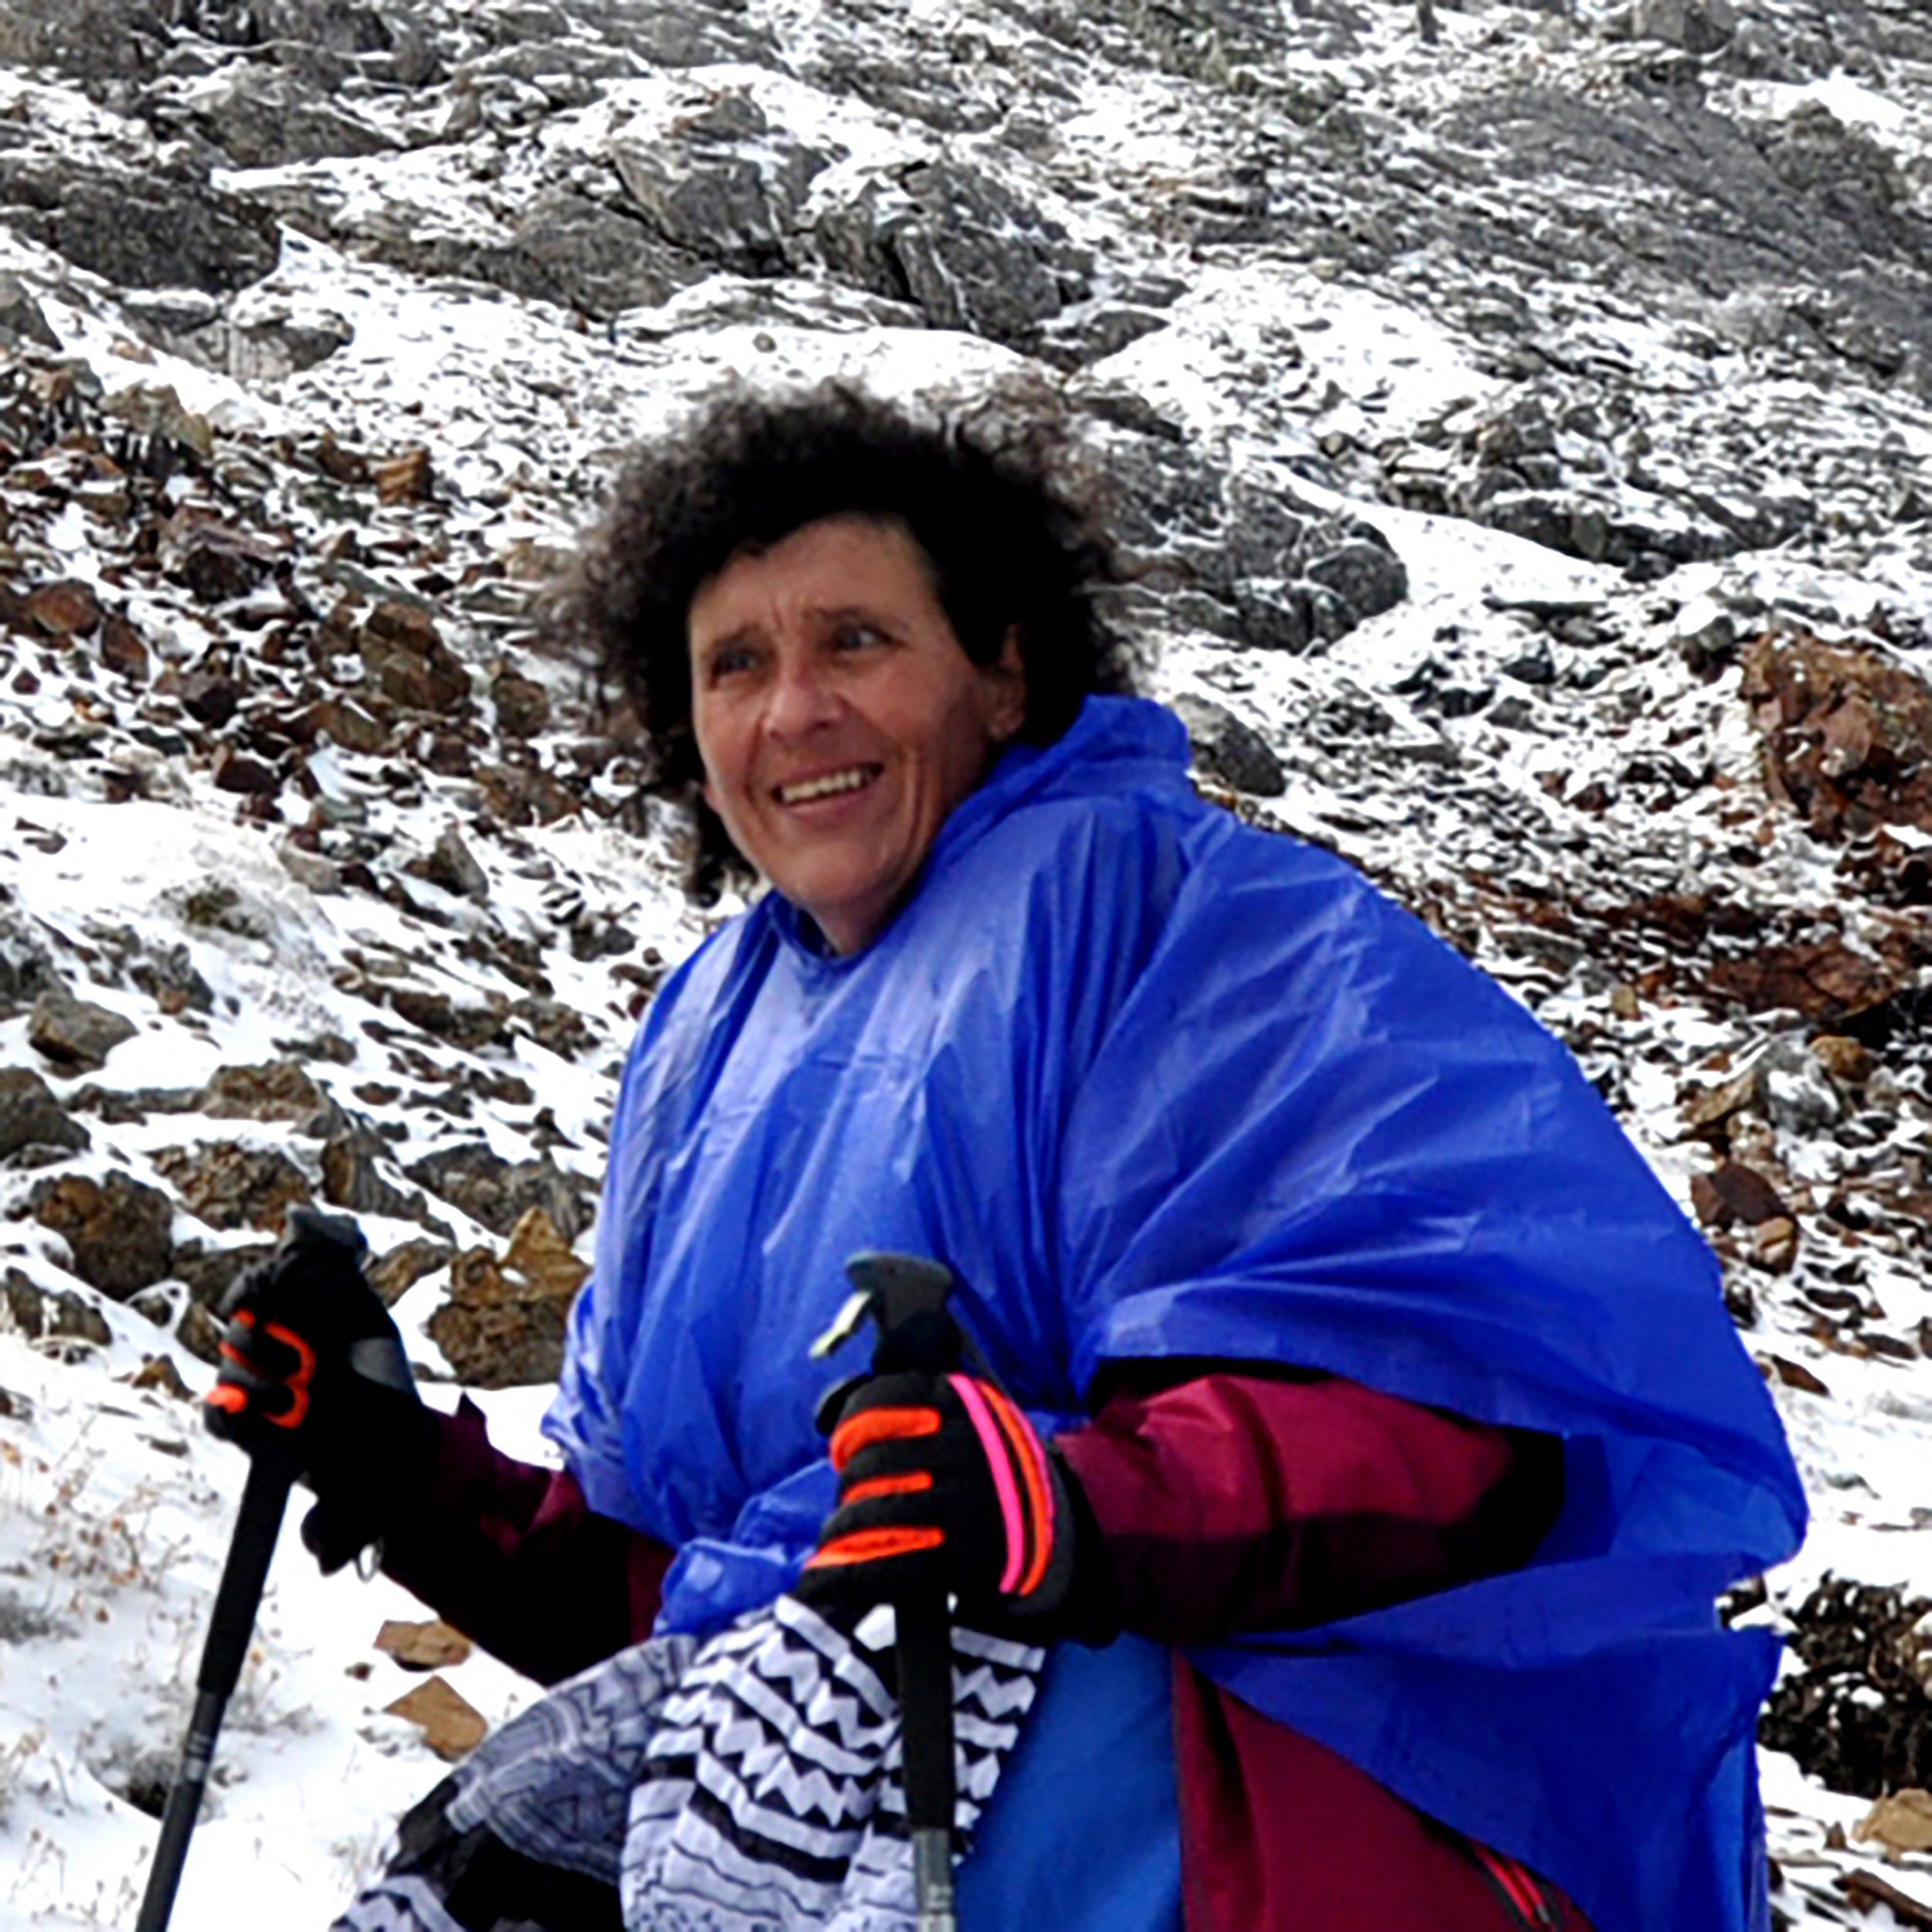 Julia - wearing a blue parka and red gloves - smiles as she makes her way to the summit